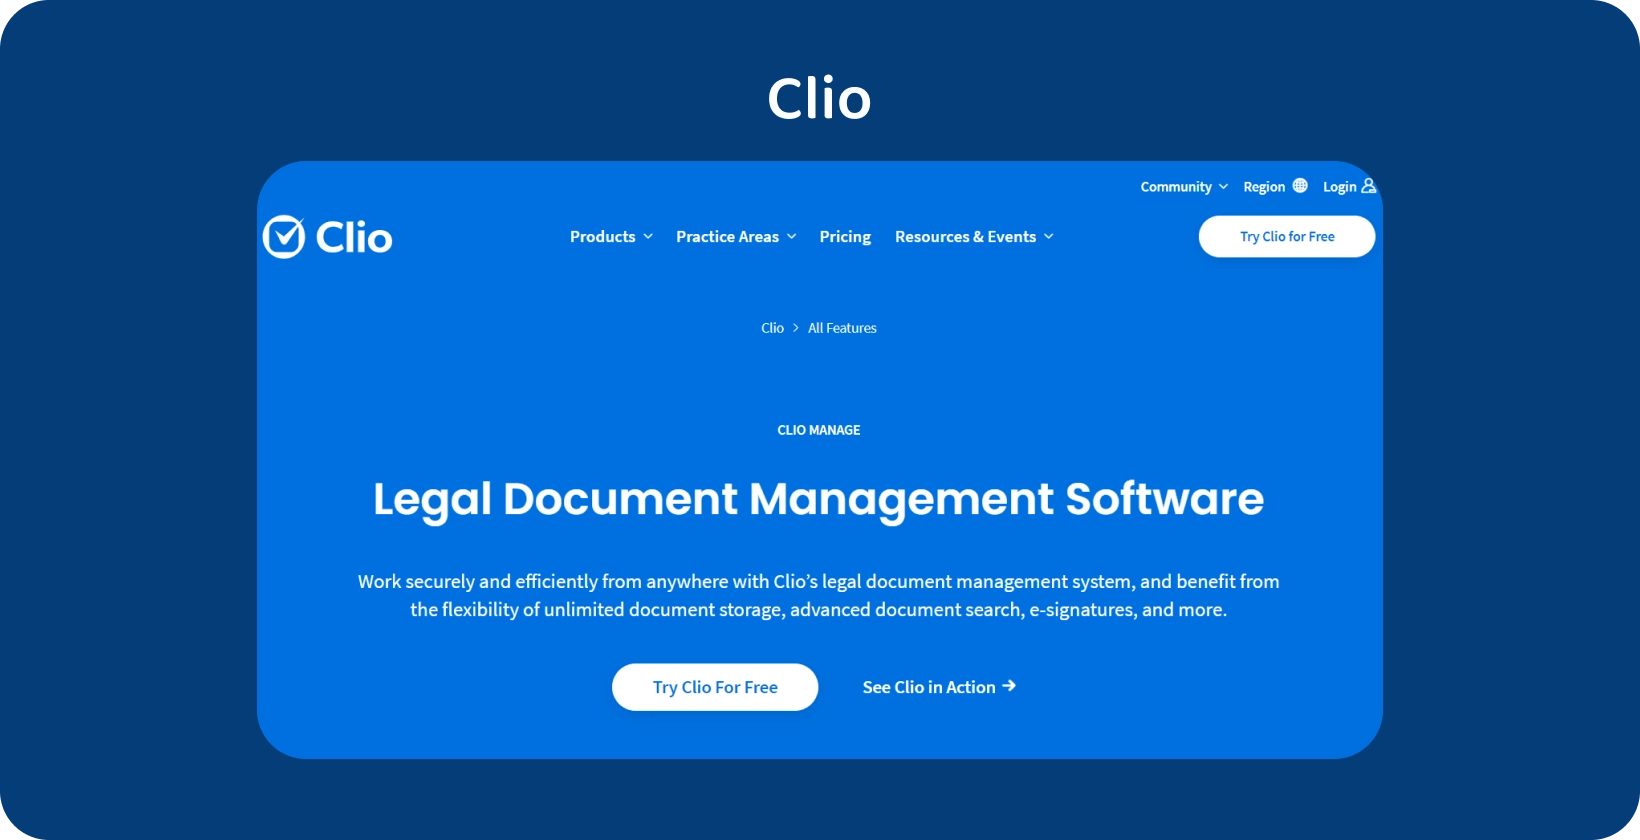 Clio's user interface showcases its Legal Document Management Software, optimizing organized records handling.